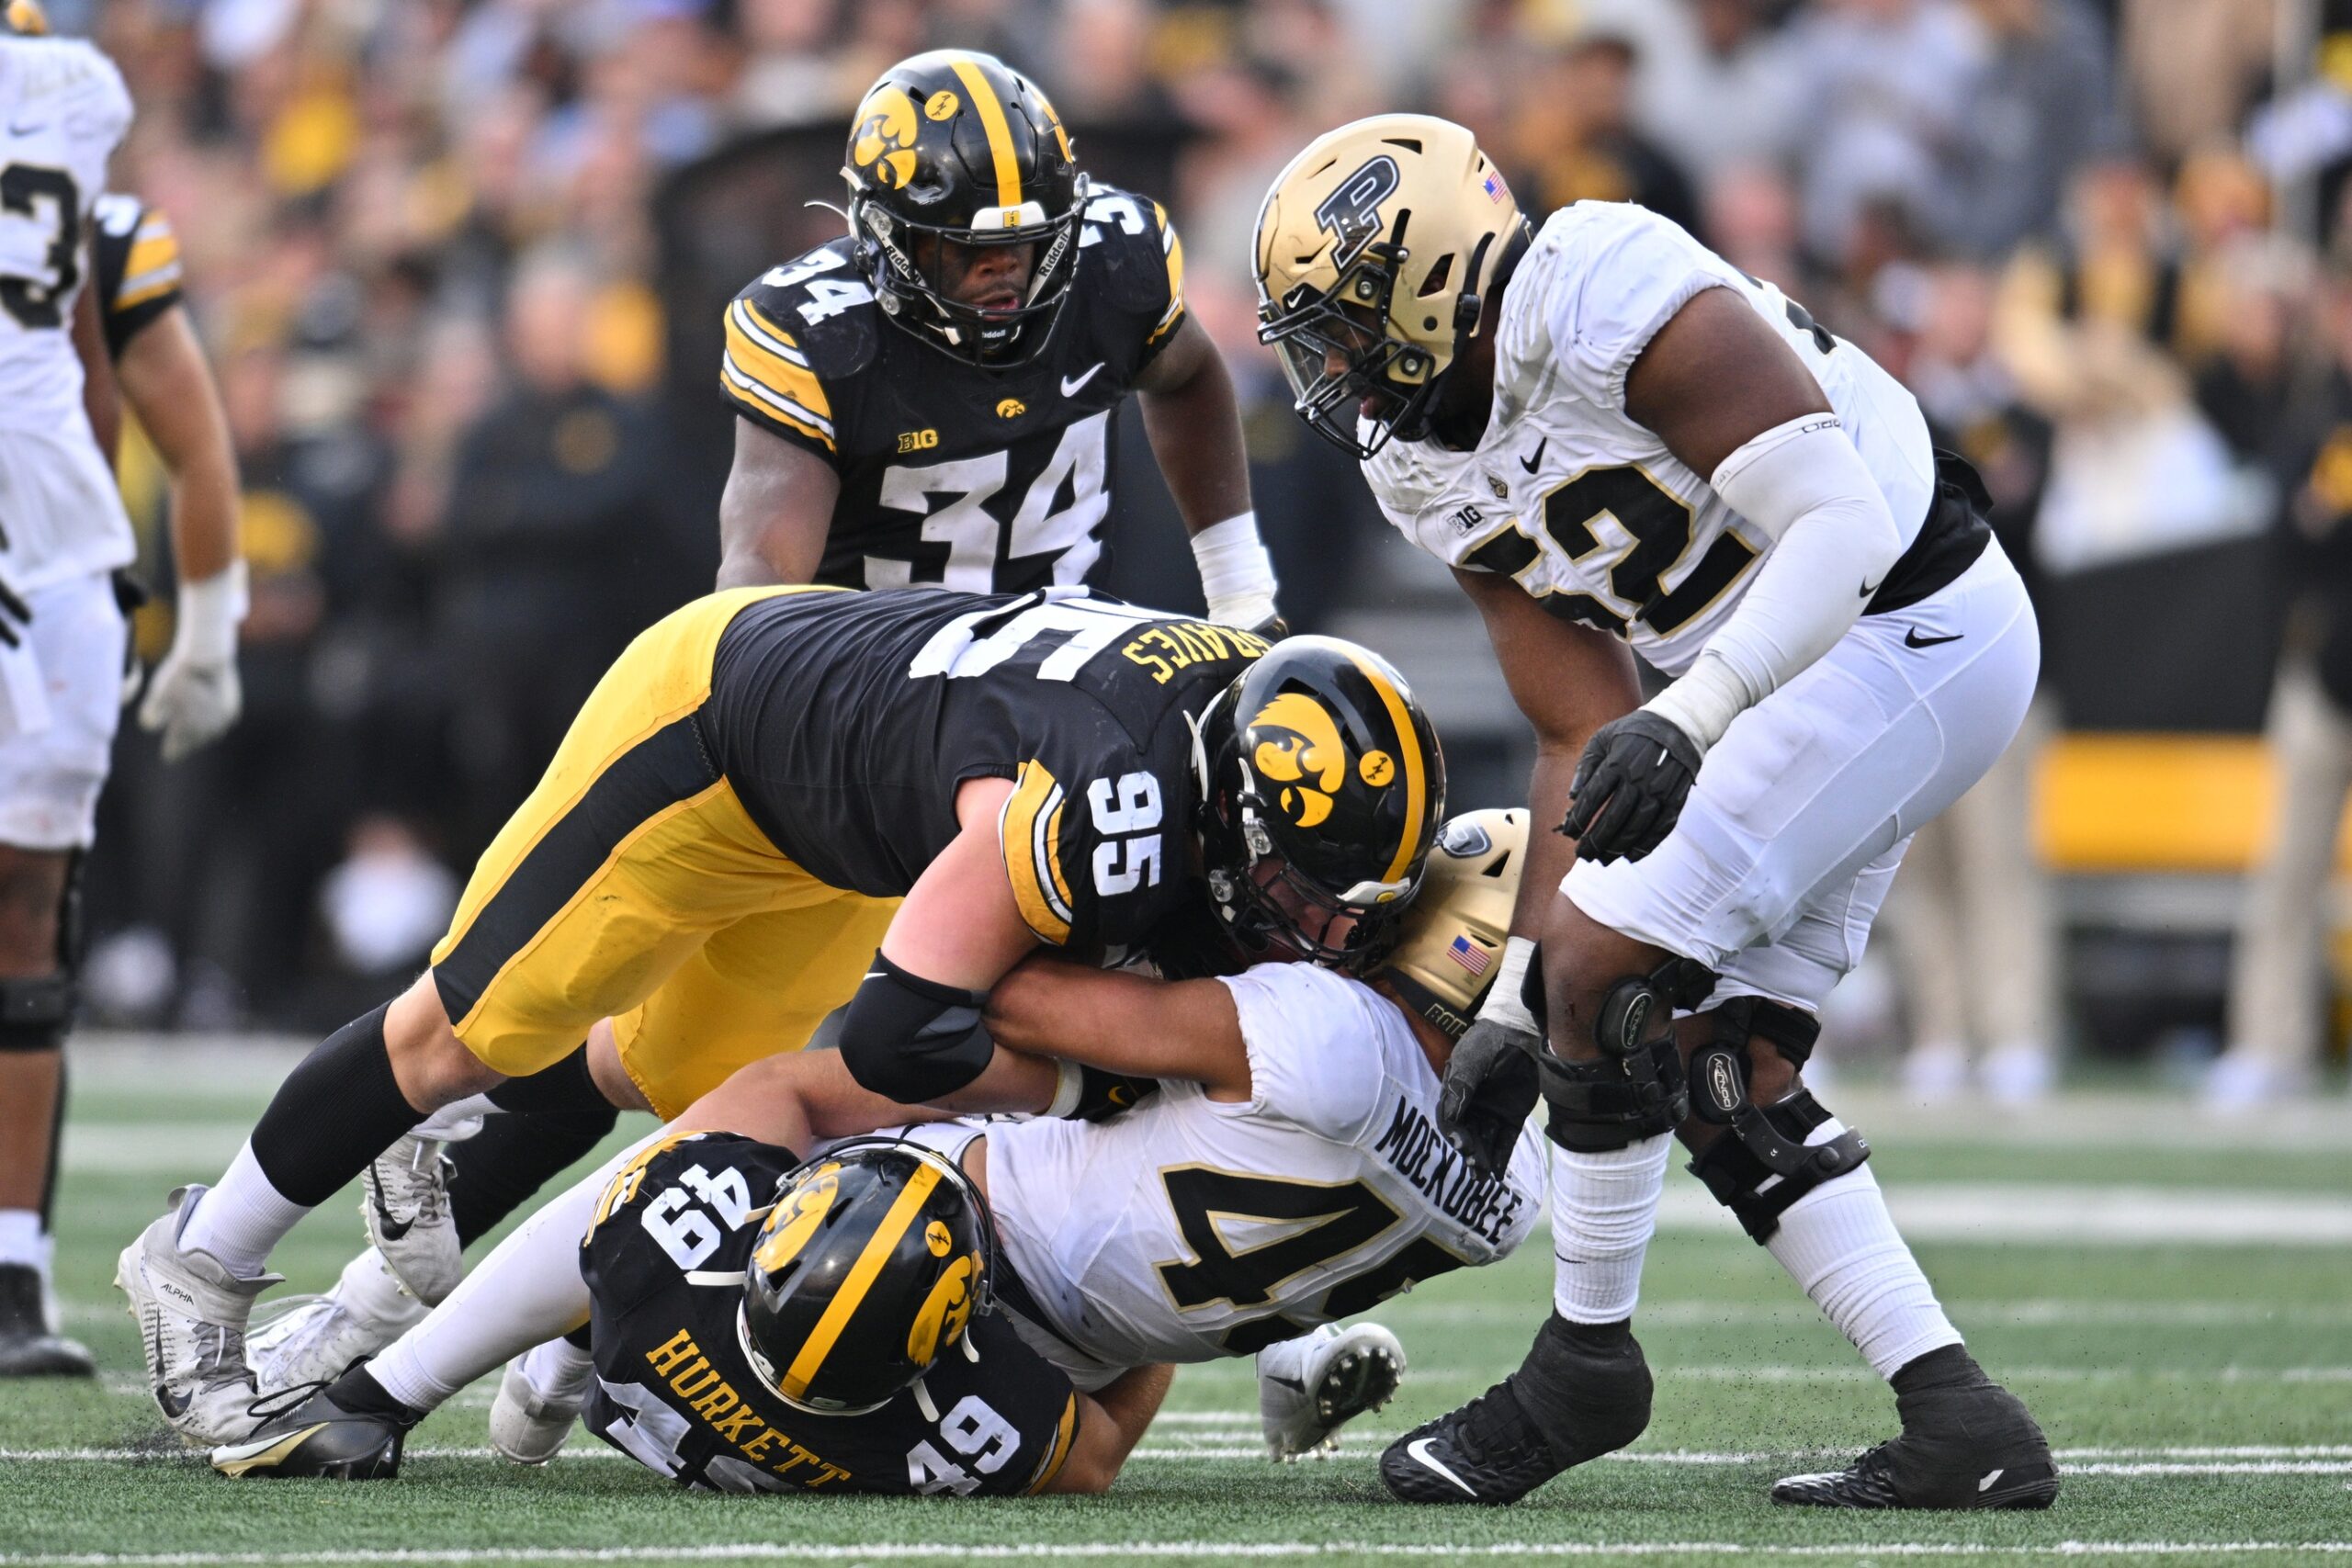 Kaleb Johnson returns from injury to rush for 134 yards in Hawkeyes' 20-14  win over Purdue, College